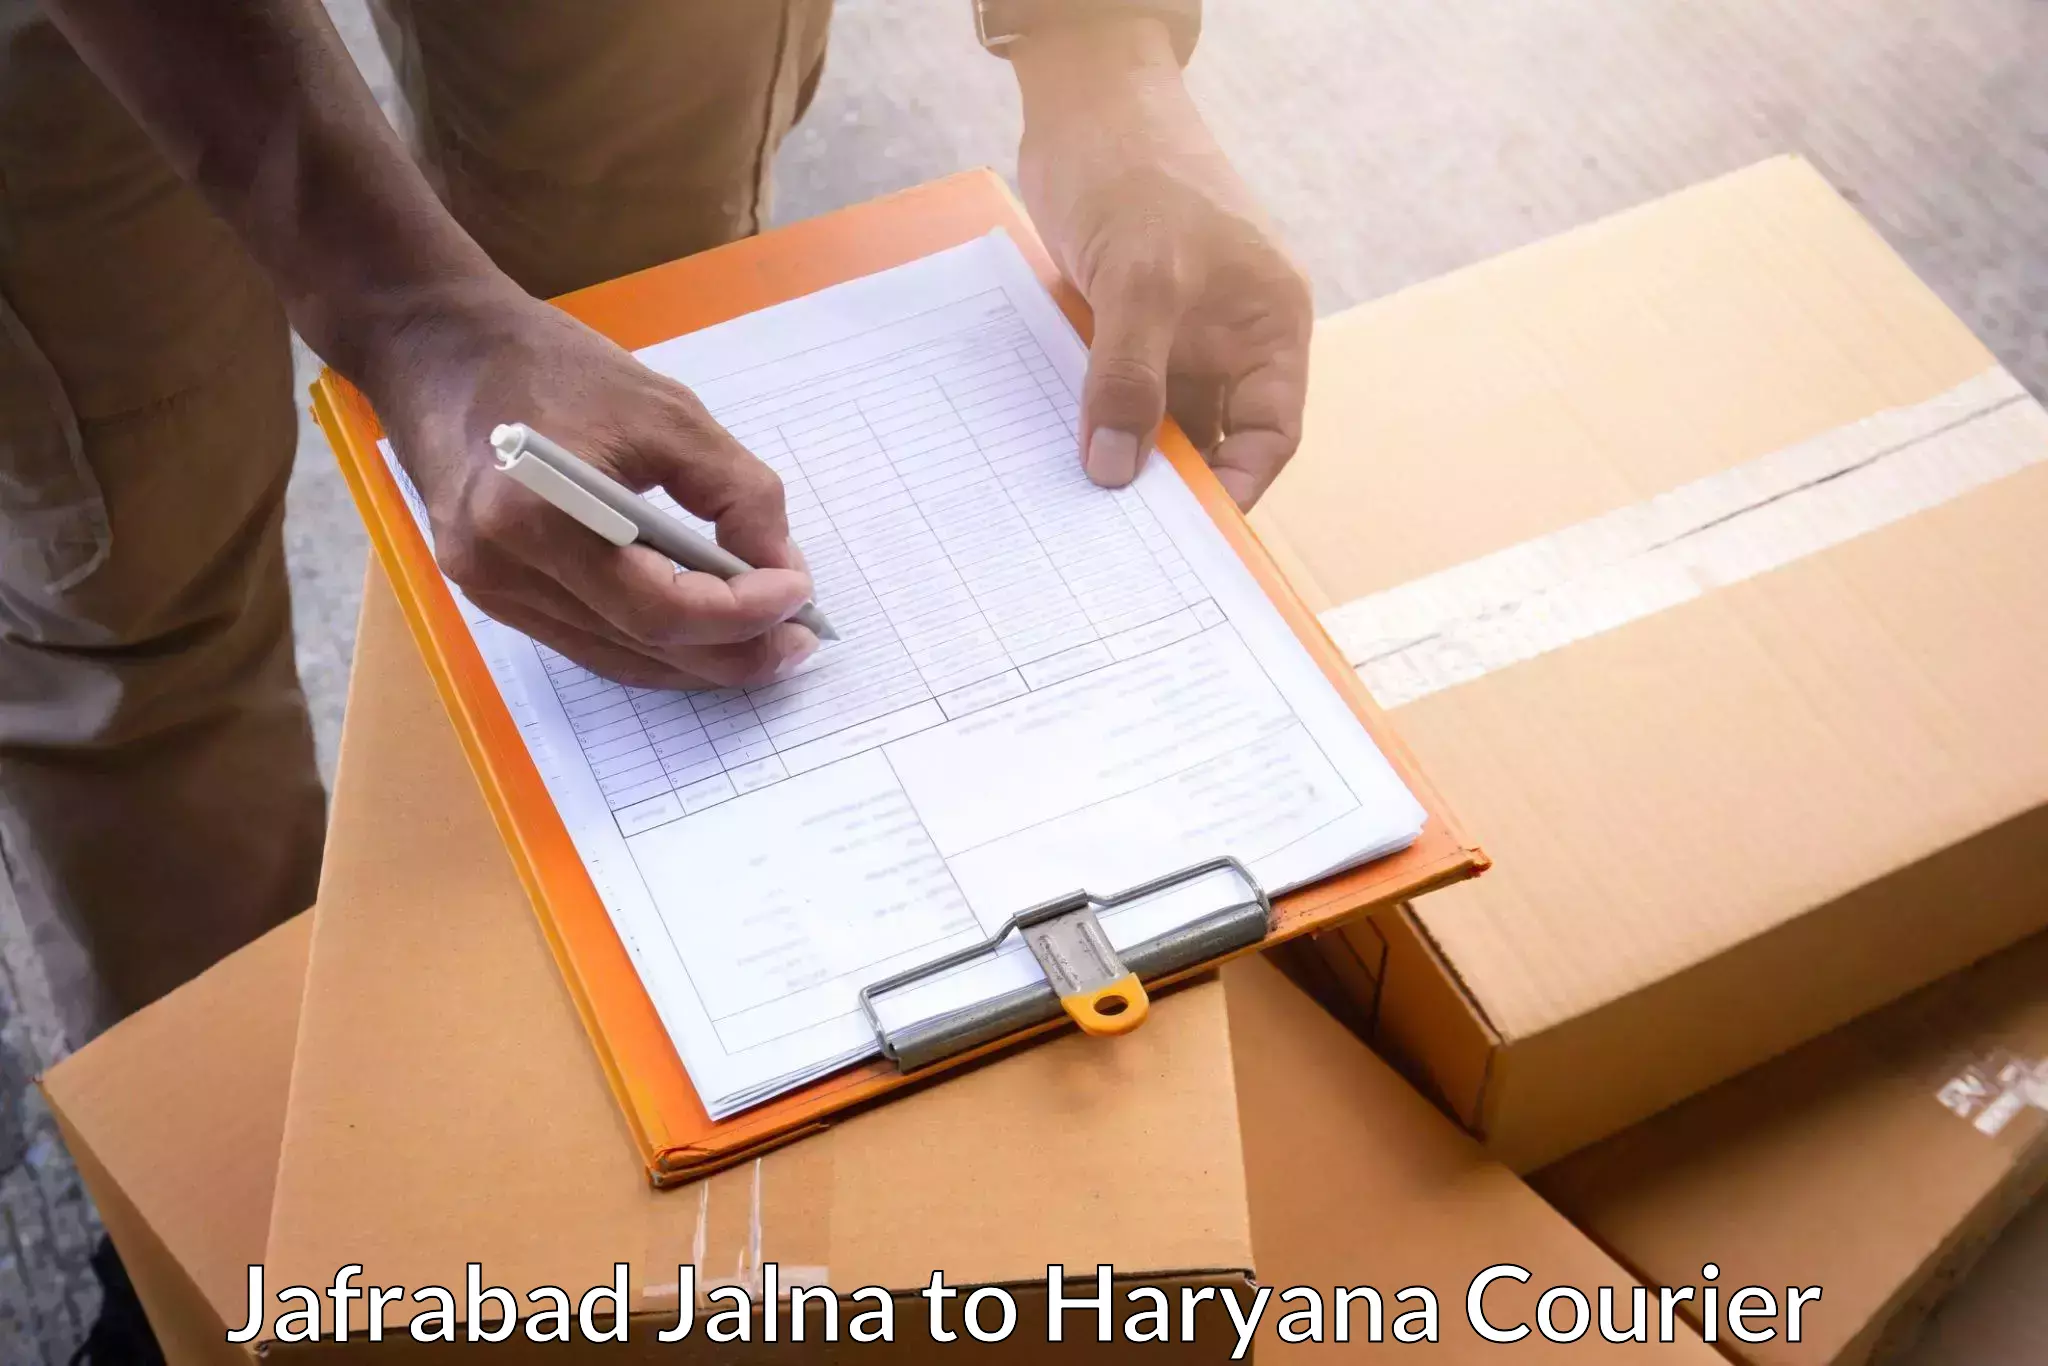 On-call courier service in Jafrabad Jalna to Haryana